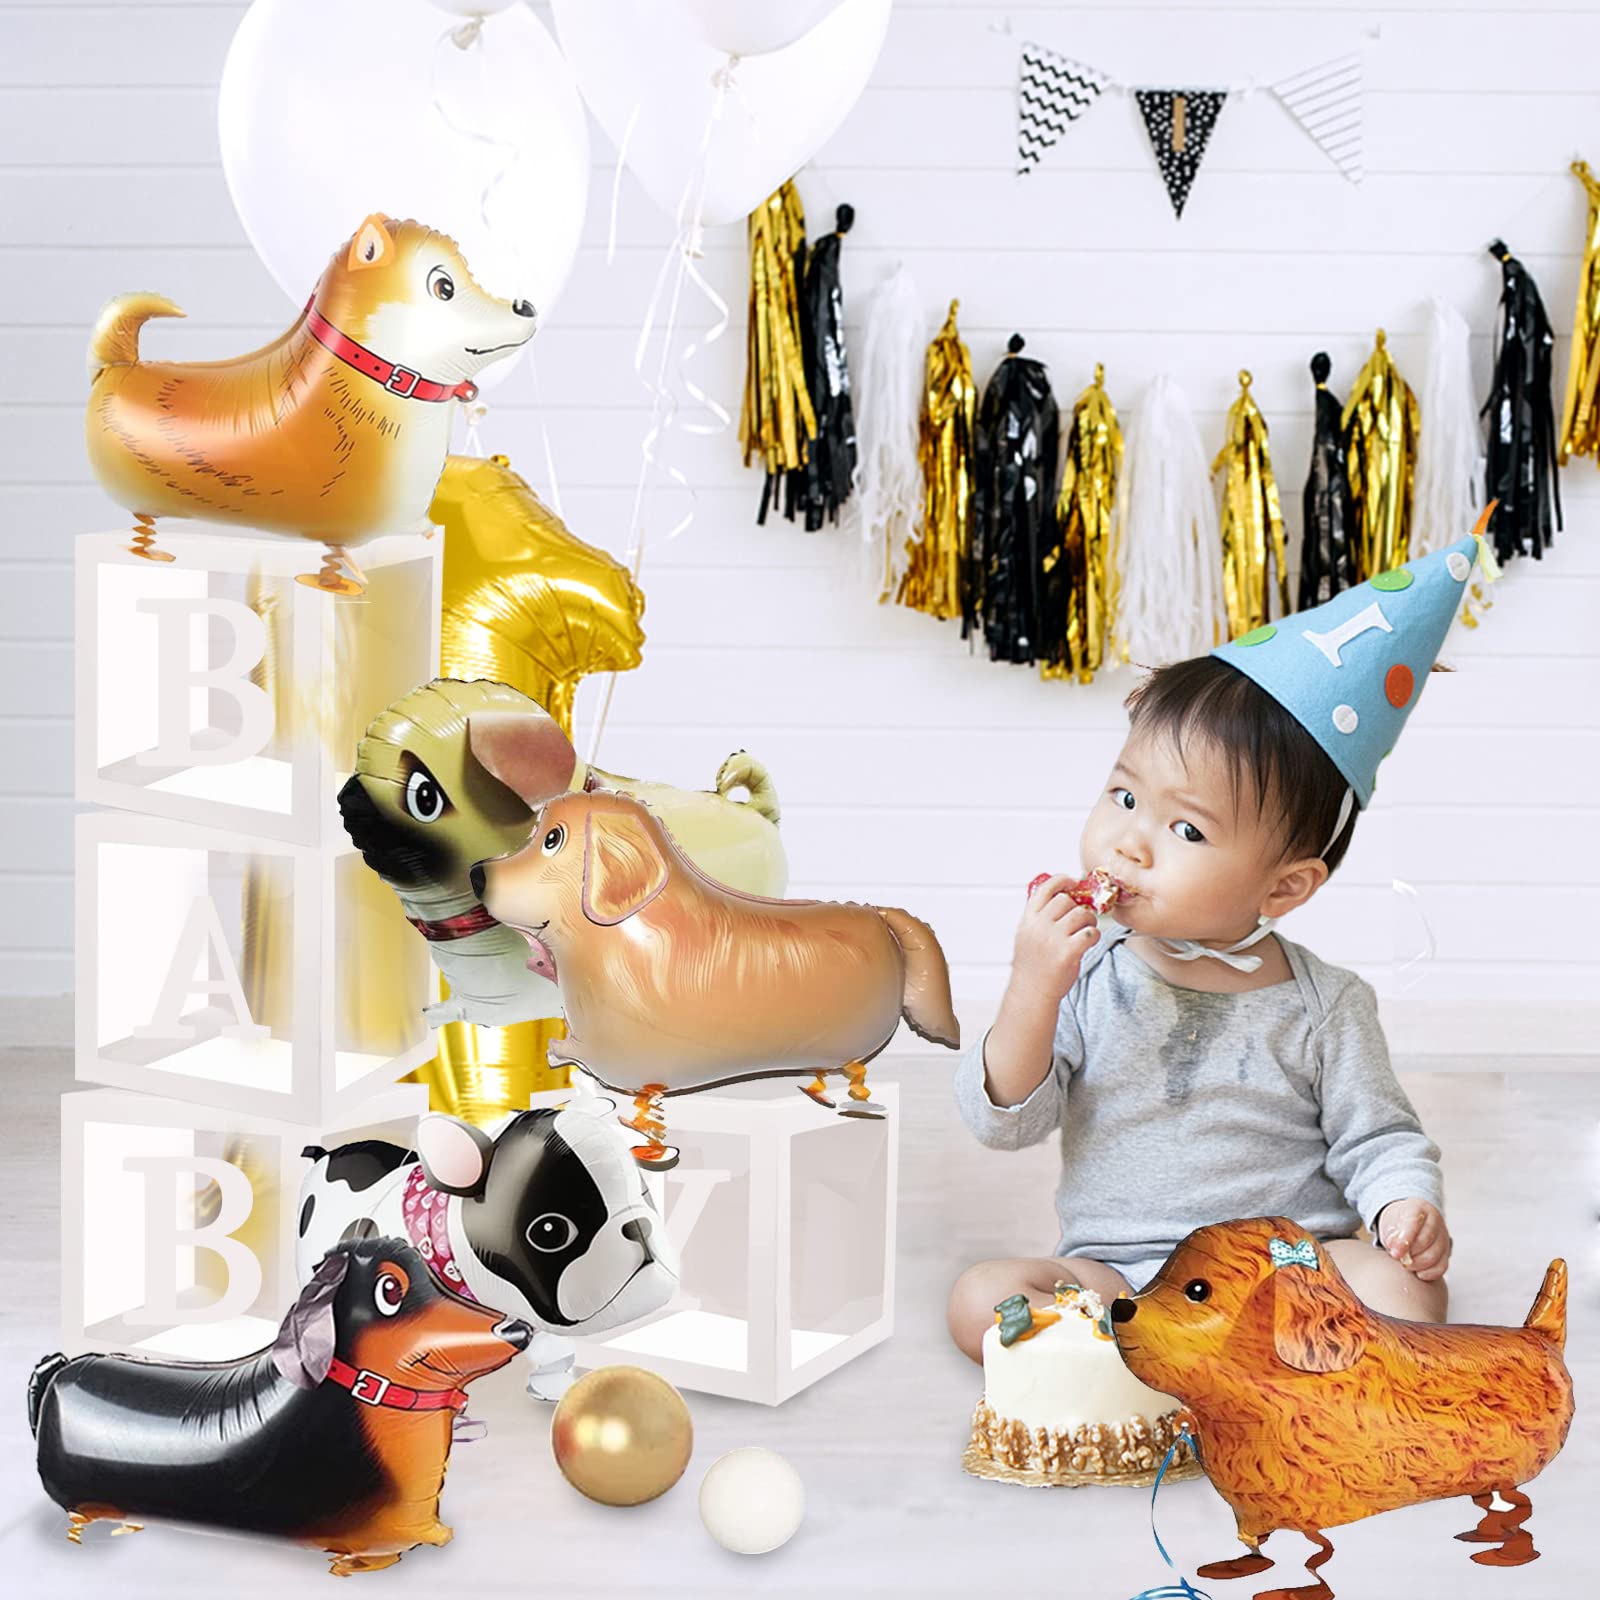 Walking Animal Balloons Pet Dog balloons - 6pcs Puppy Dogs Birthday Party Supplies Kids Balloons Animal Theme Birthday Party Decorations